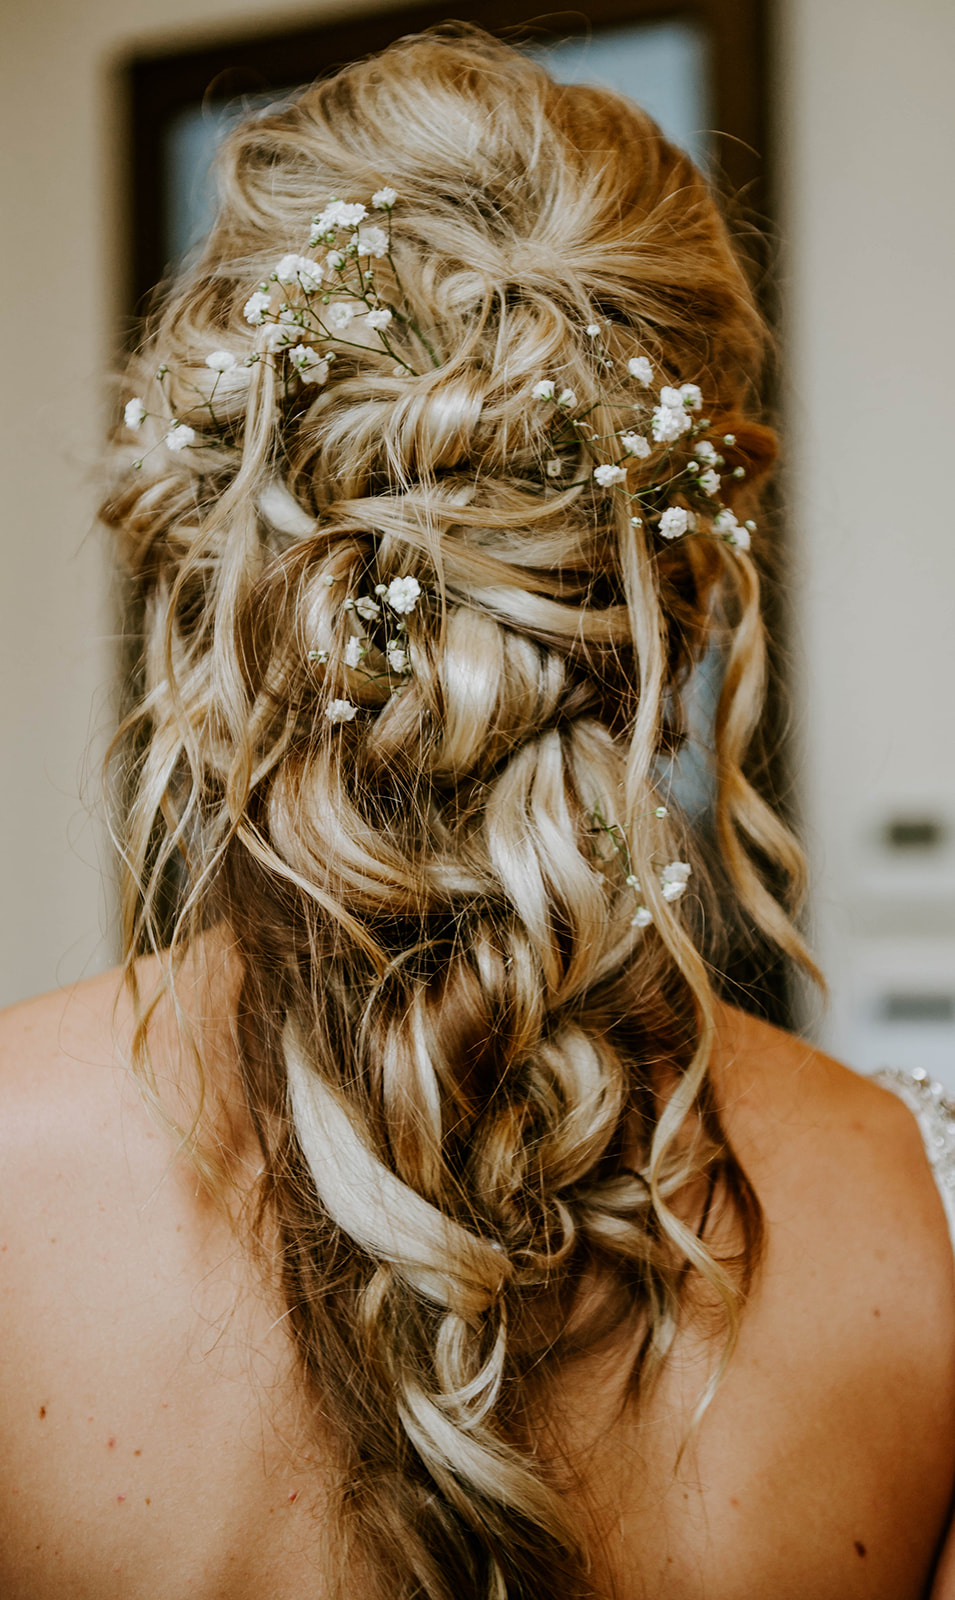 Blonde messy updo as a partial braid with baby's breath flowers in it.